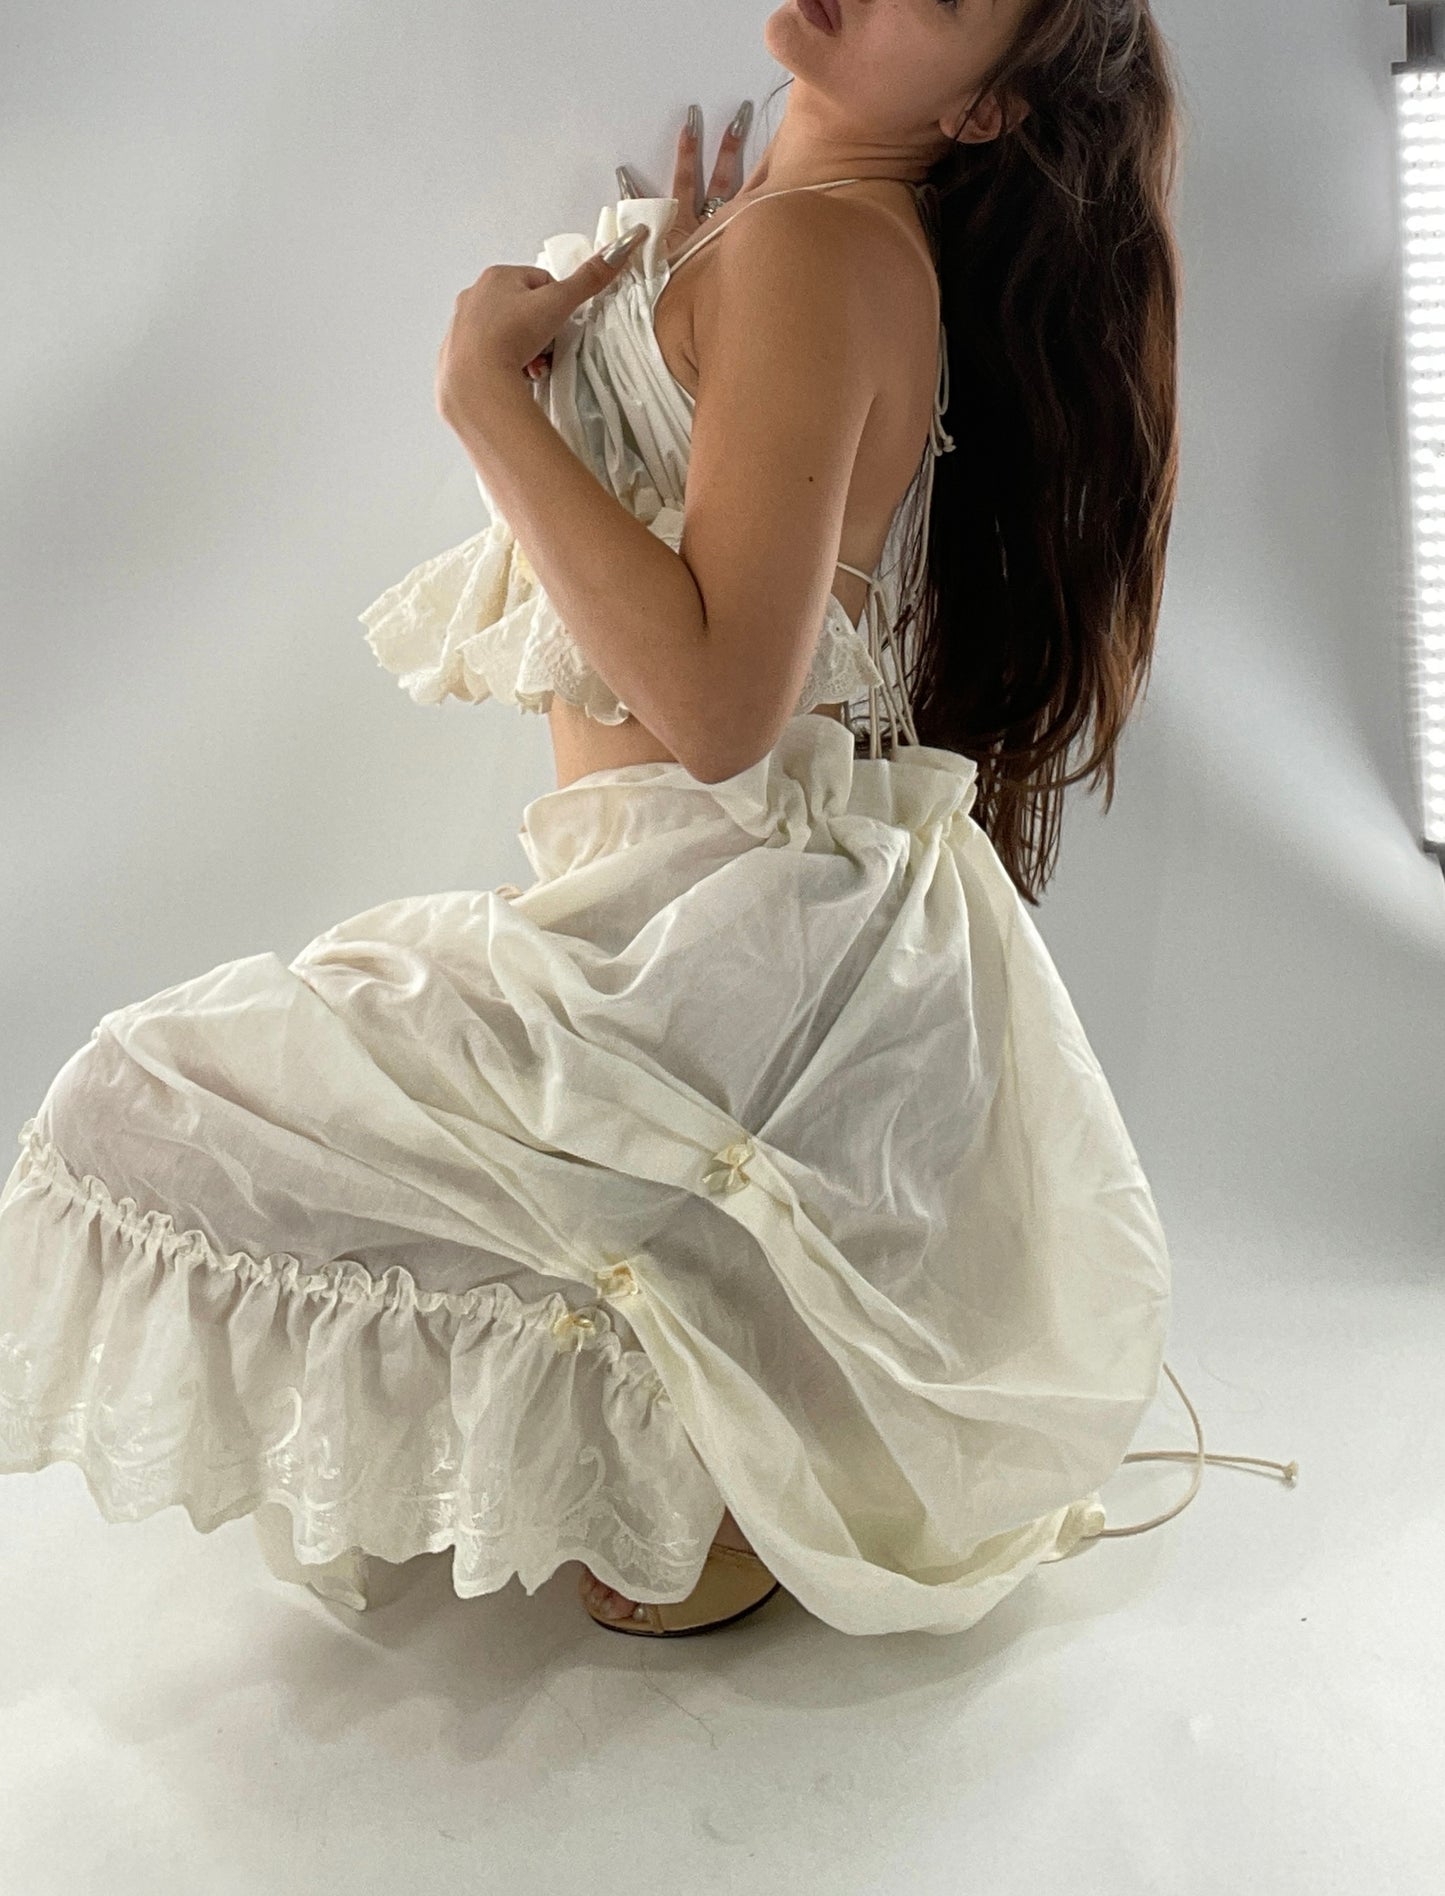 Custom Vintage Cottage Off White Set with Ruched/Scalloped Lace/Backless Top and Draping/Ribbon Skirt (One Size)